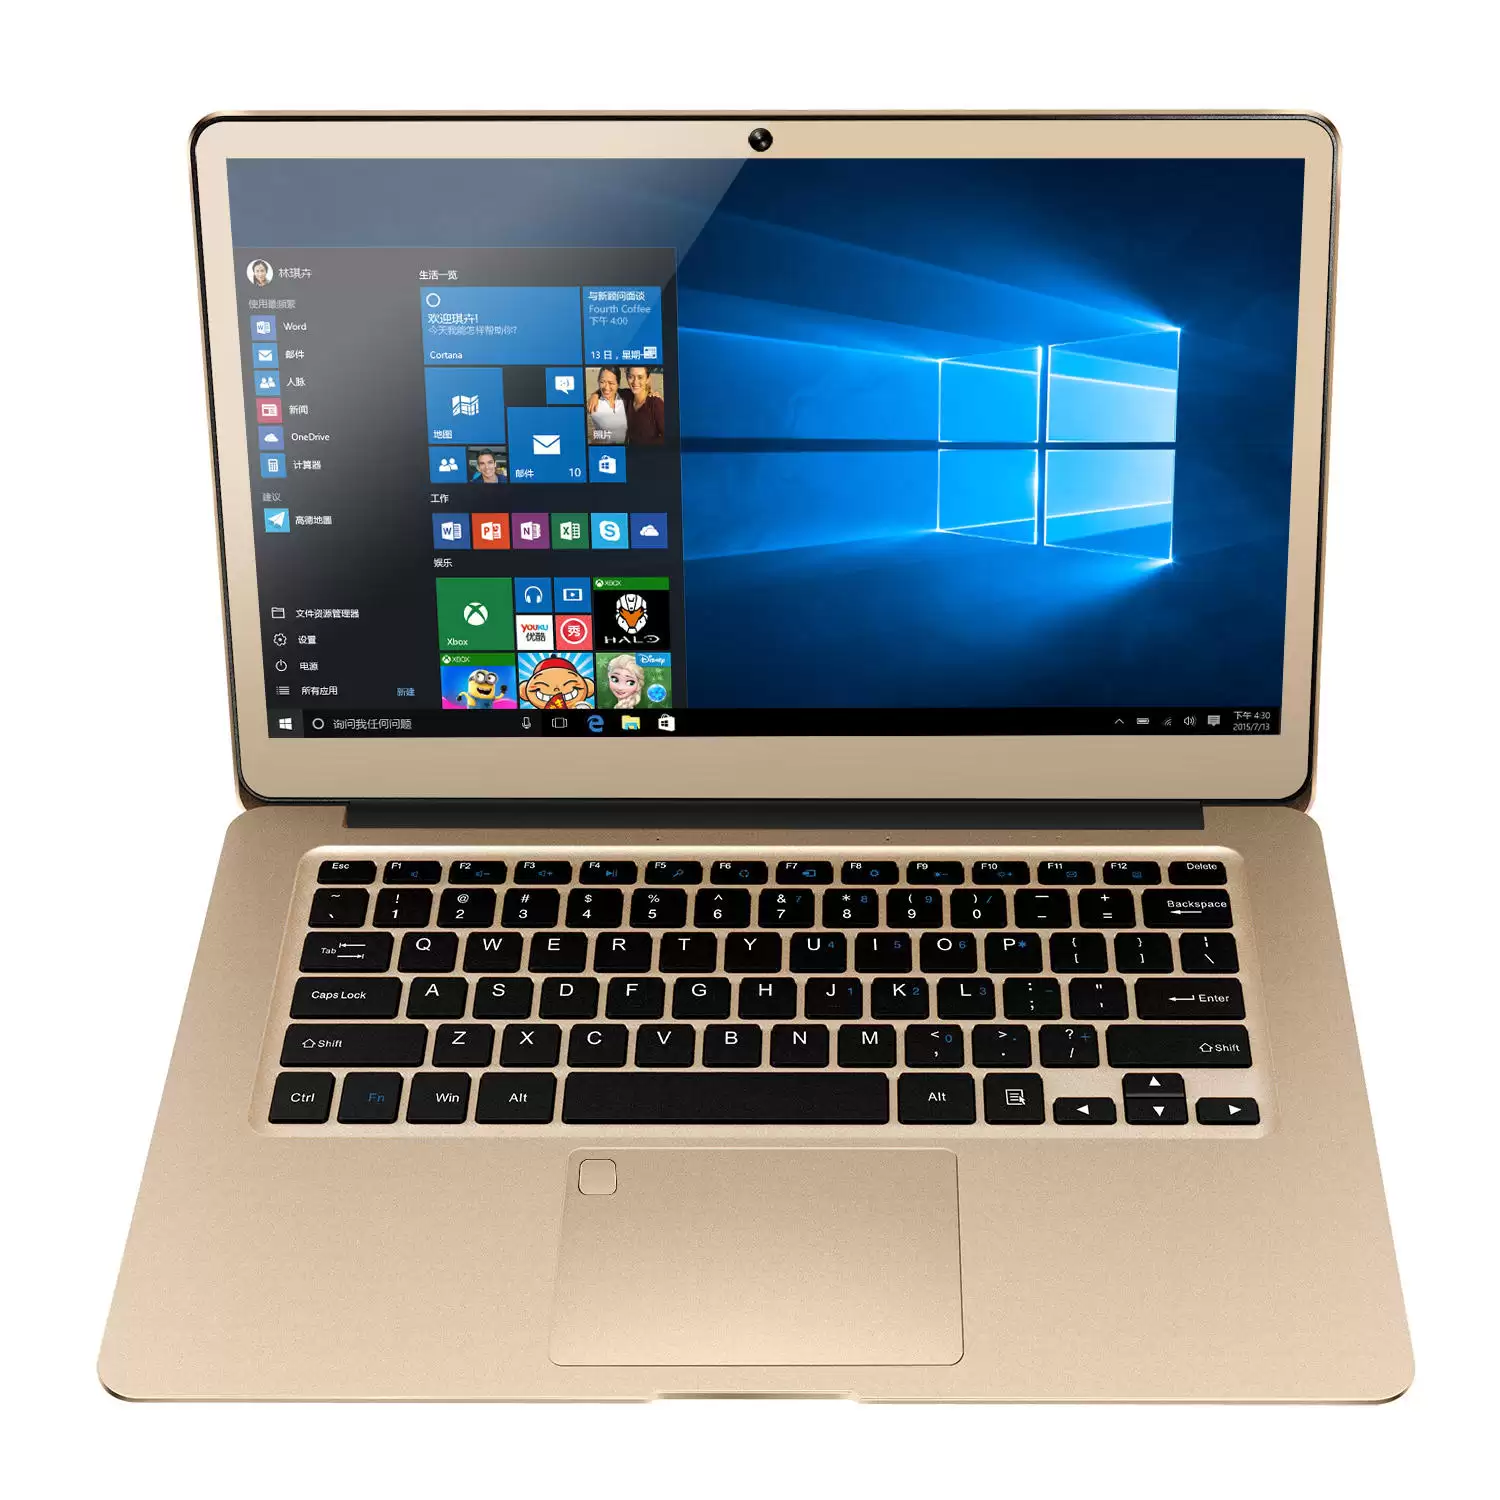 Order In Just $179.99 Onda Xiaoma 31 Intel N3450 13.3 Inch Quad Core 1.10ghz 4gb Ddr3 64gb Emmc Intel Hd Graphics 500 Win 10 Home Laptop Hdmi Full Metal Golden Luxury Notebook 500 Ips Screen With This Coupon At Banggood